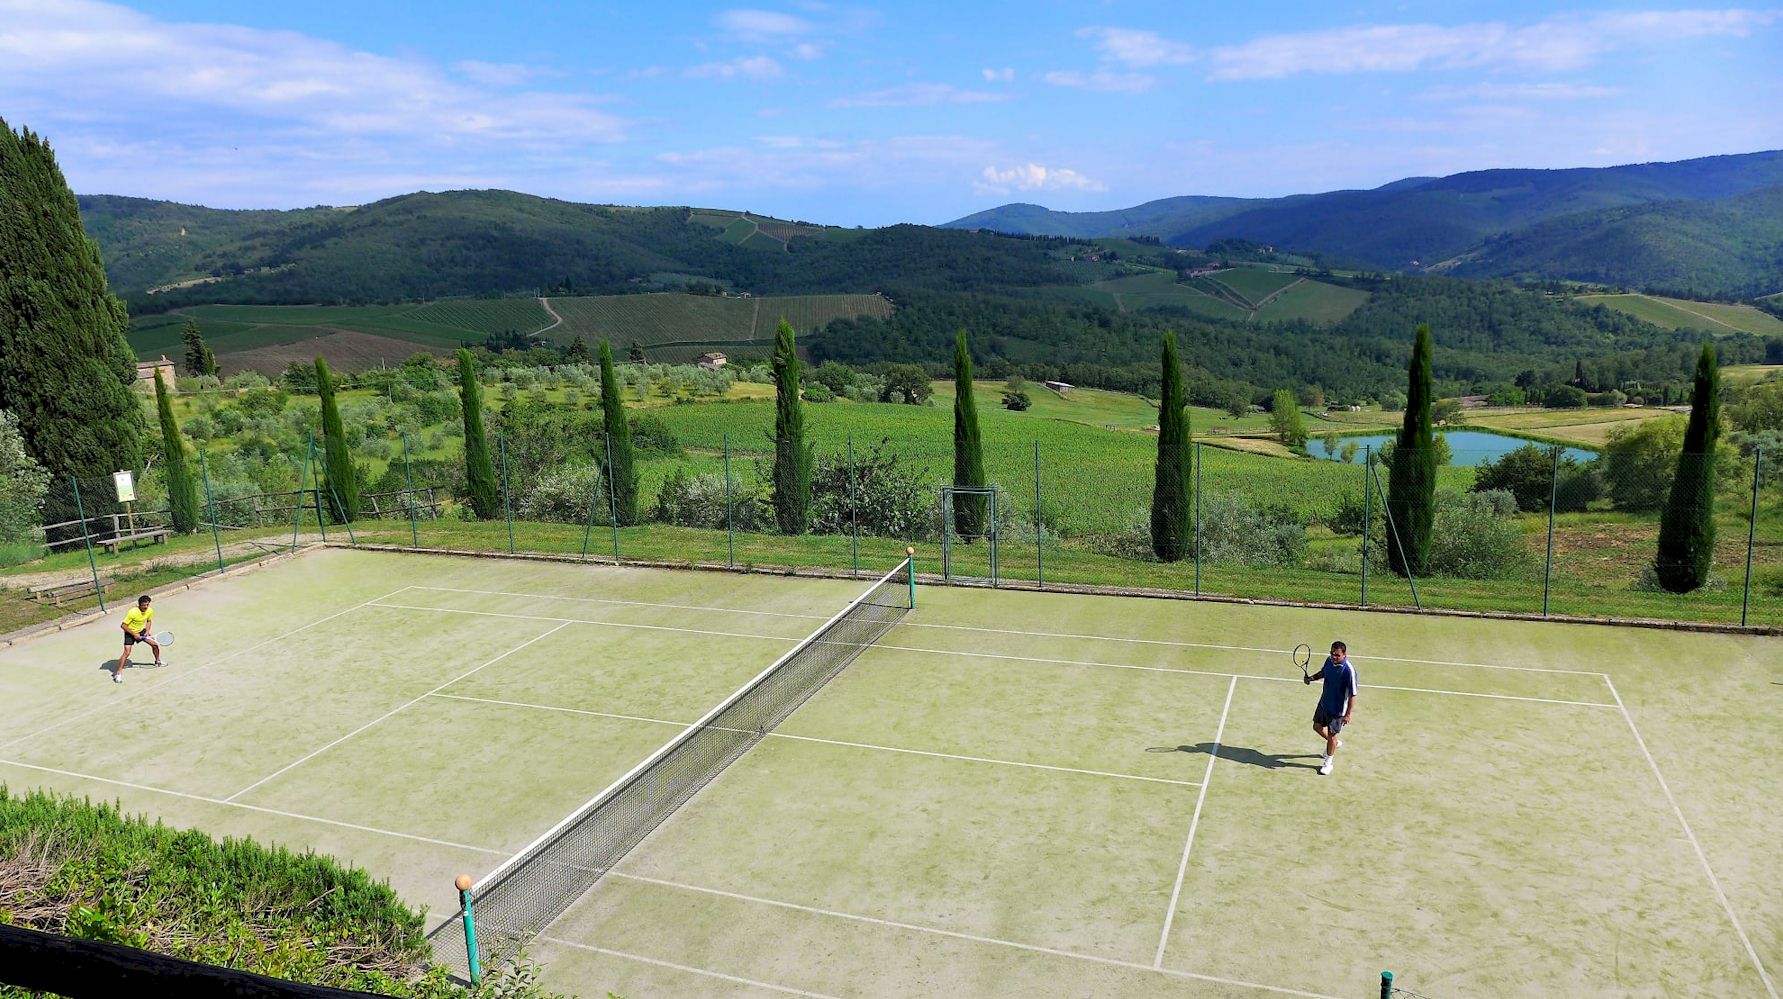 Villa Le Barone accommodation in Tuscany with tennis court